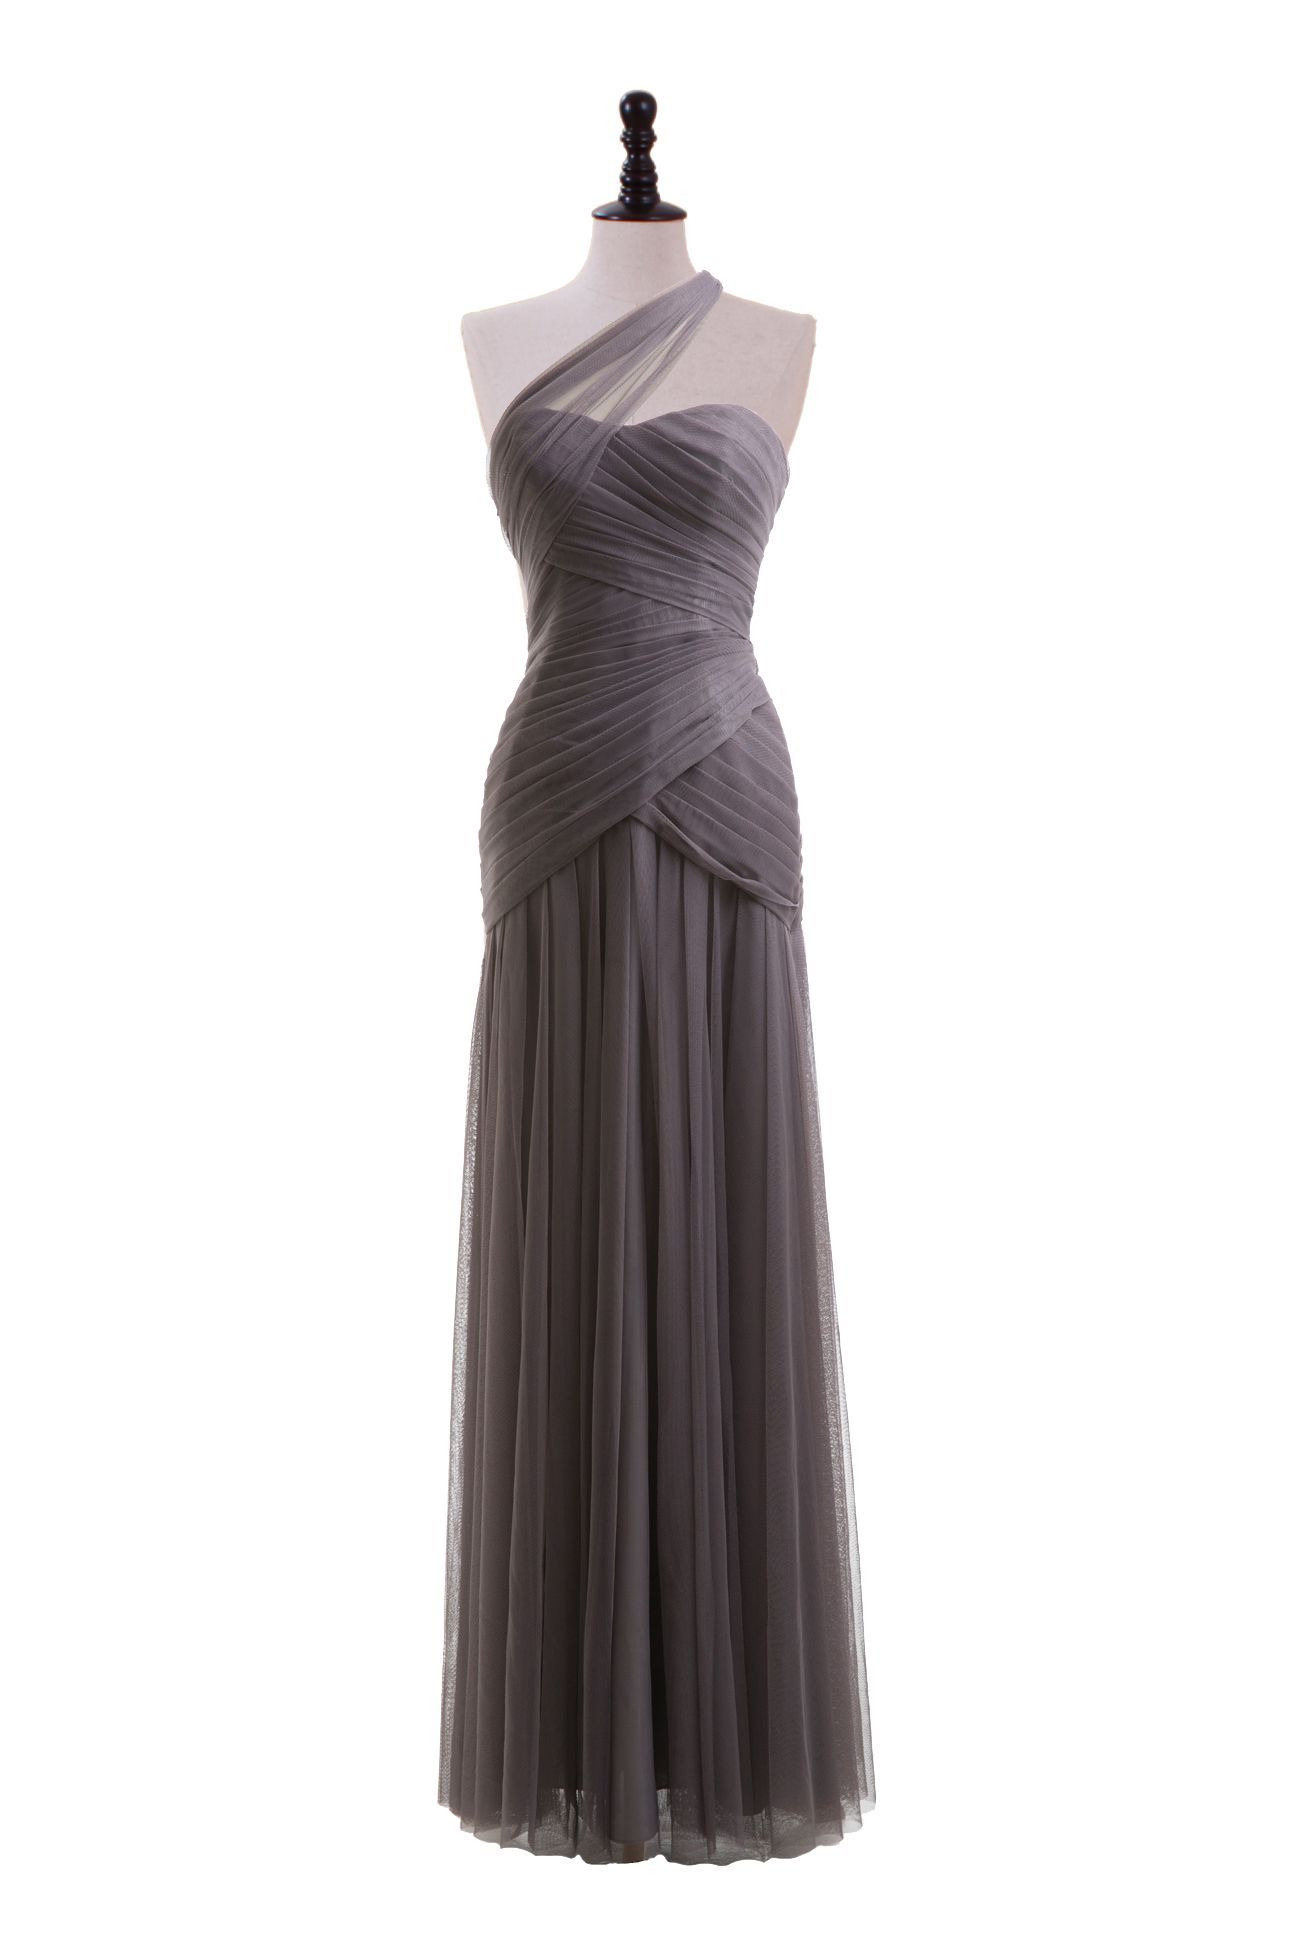 One Shoulder Tulle Gown @Patti B B Megee